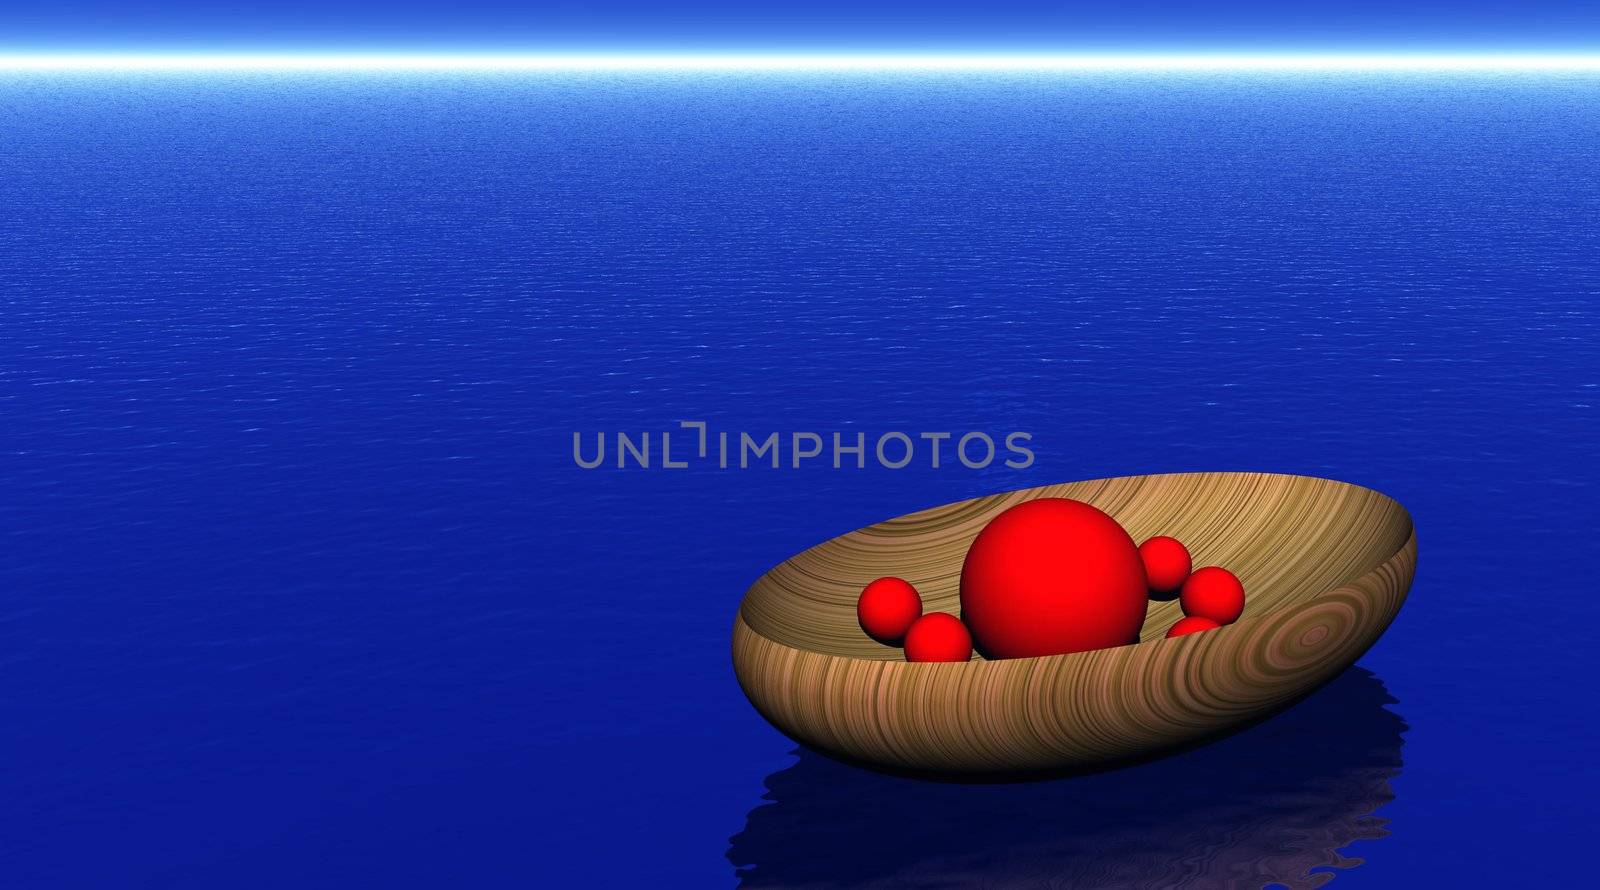 One big and several small red ball in a wood boat floating on a deep blue sea by the night